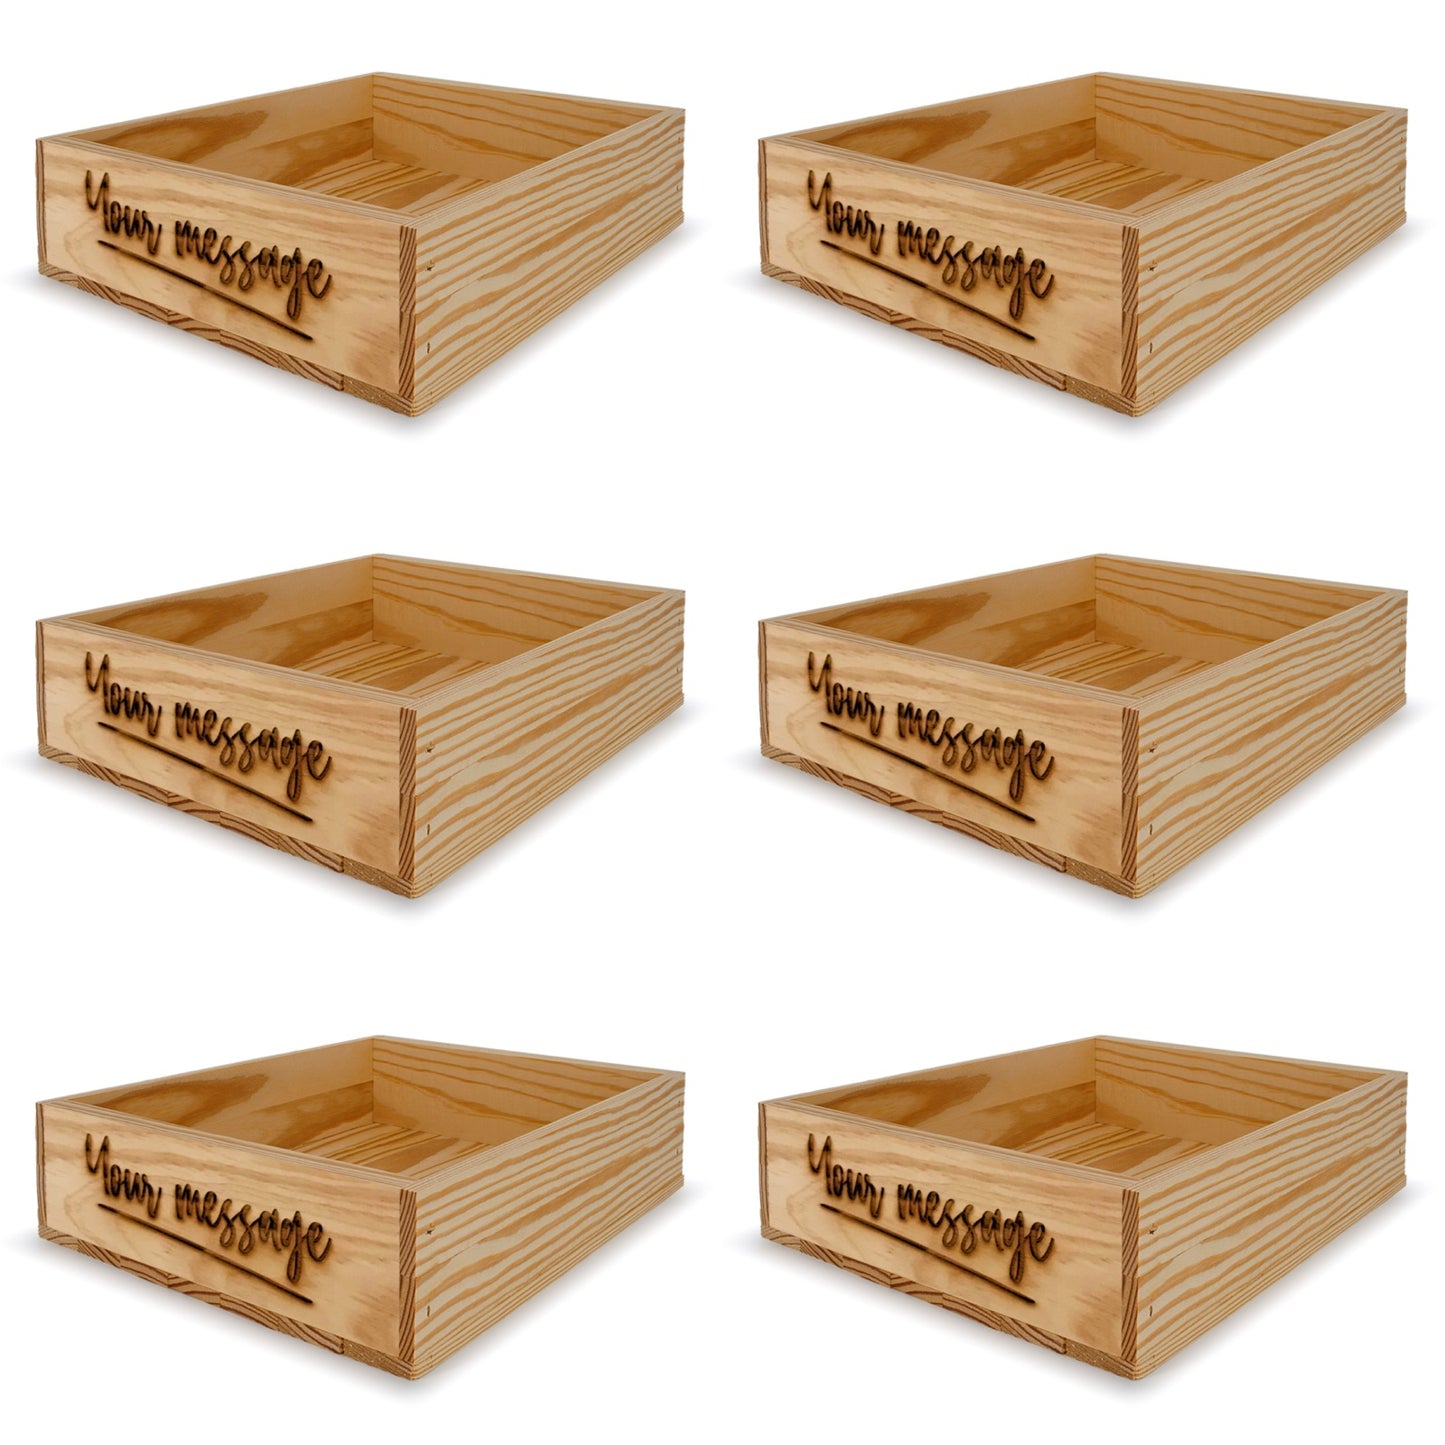 6 Small wooden crates with custom message 14x11.5x3.5